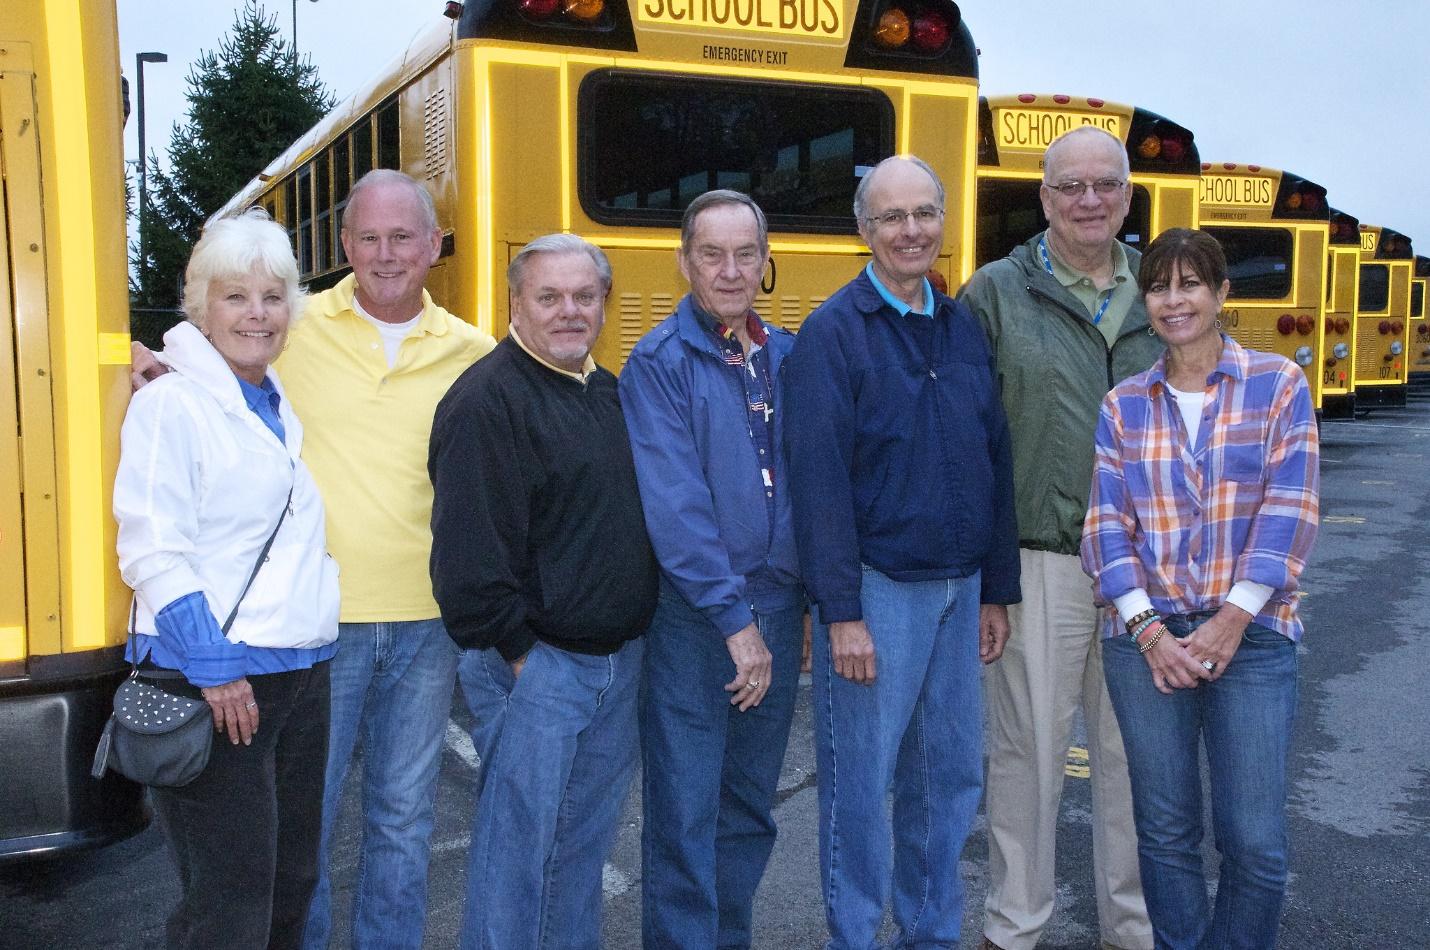 A group of people posing for a photo in front of a yellow school bus

Description automatically generated